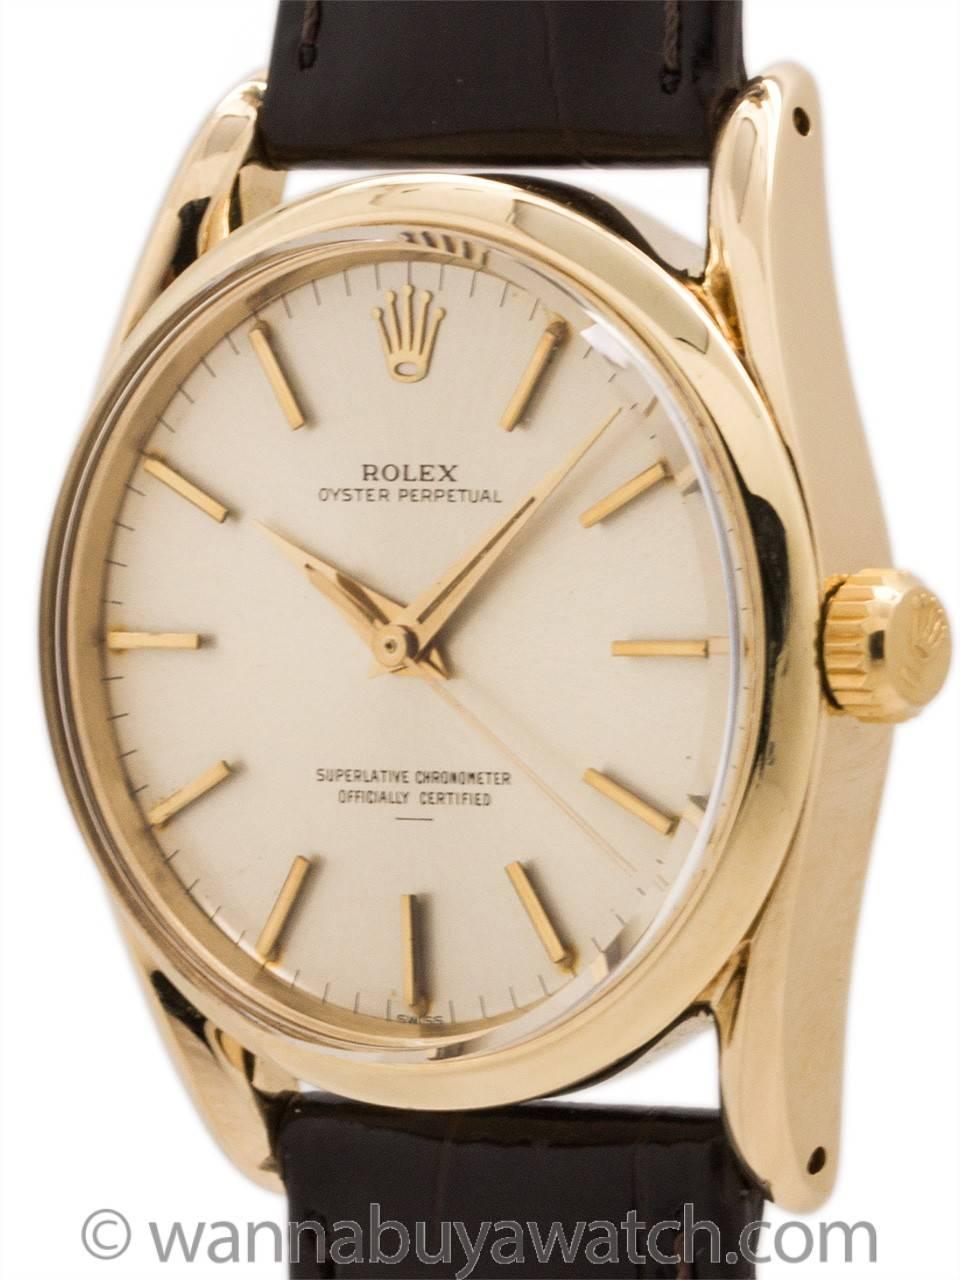 Rolex Oyster Perpetual so called  “Bombe” model 14K gold ref # 1010 serial# 100,xxx circa 1964. Featuring 34 x 40mm Oyster case with bowed lugs, smooth bezel, acrylic dome style crystal, and beautiful  condition original matte silver dial with